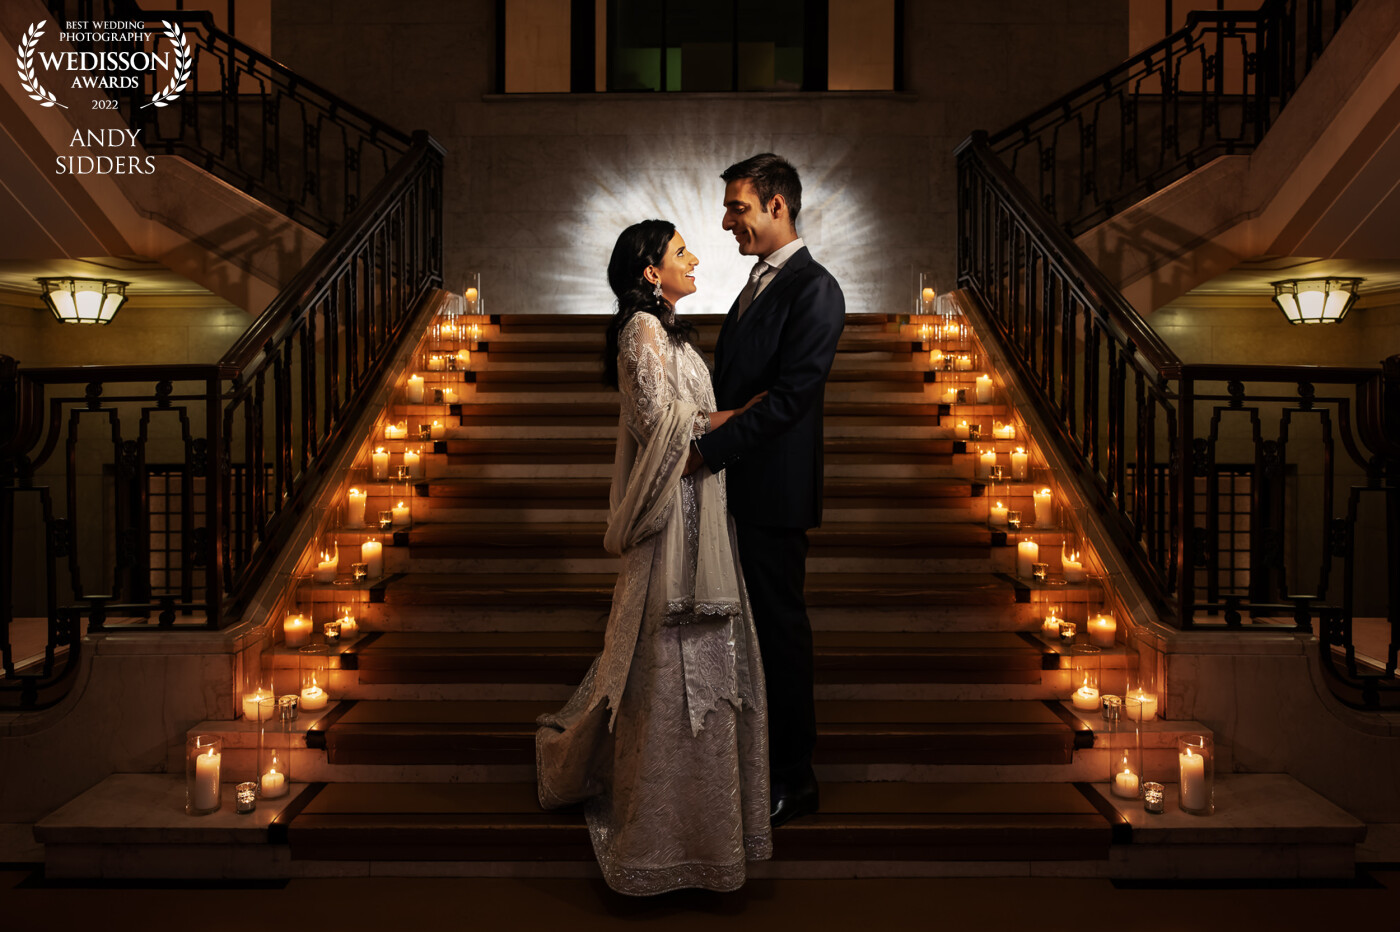 This image was taken at Banking Hall in London. I used a Magbeam to project a light pattern onto the wall at the top of the stairs and lit the couple using flash.